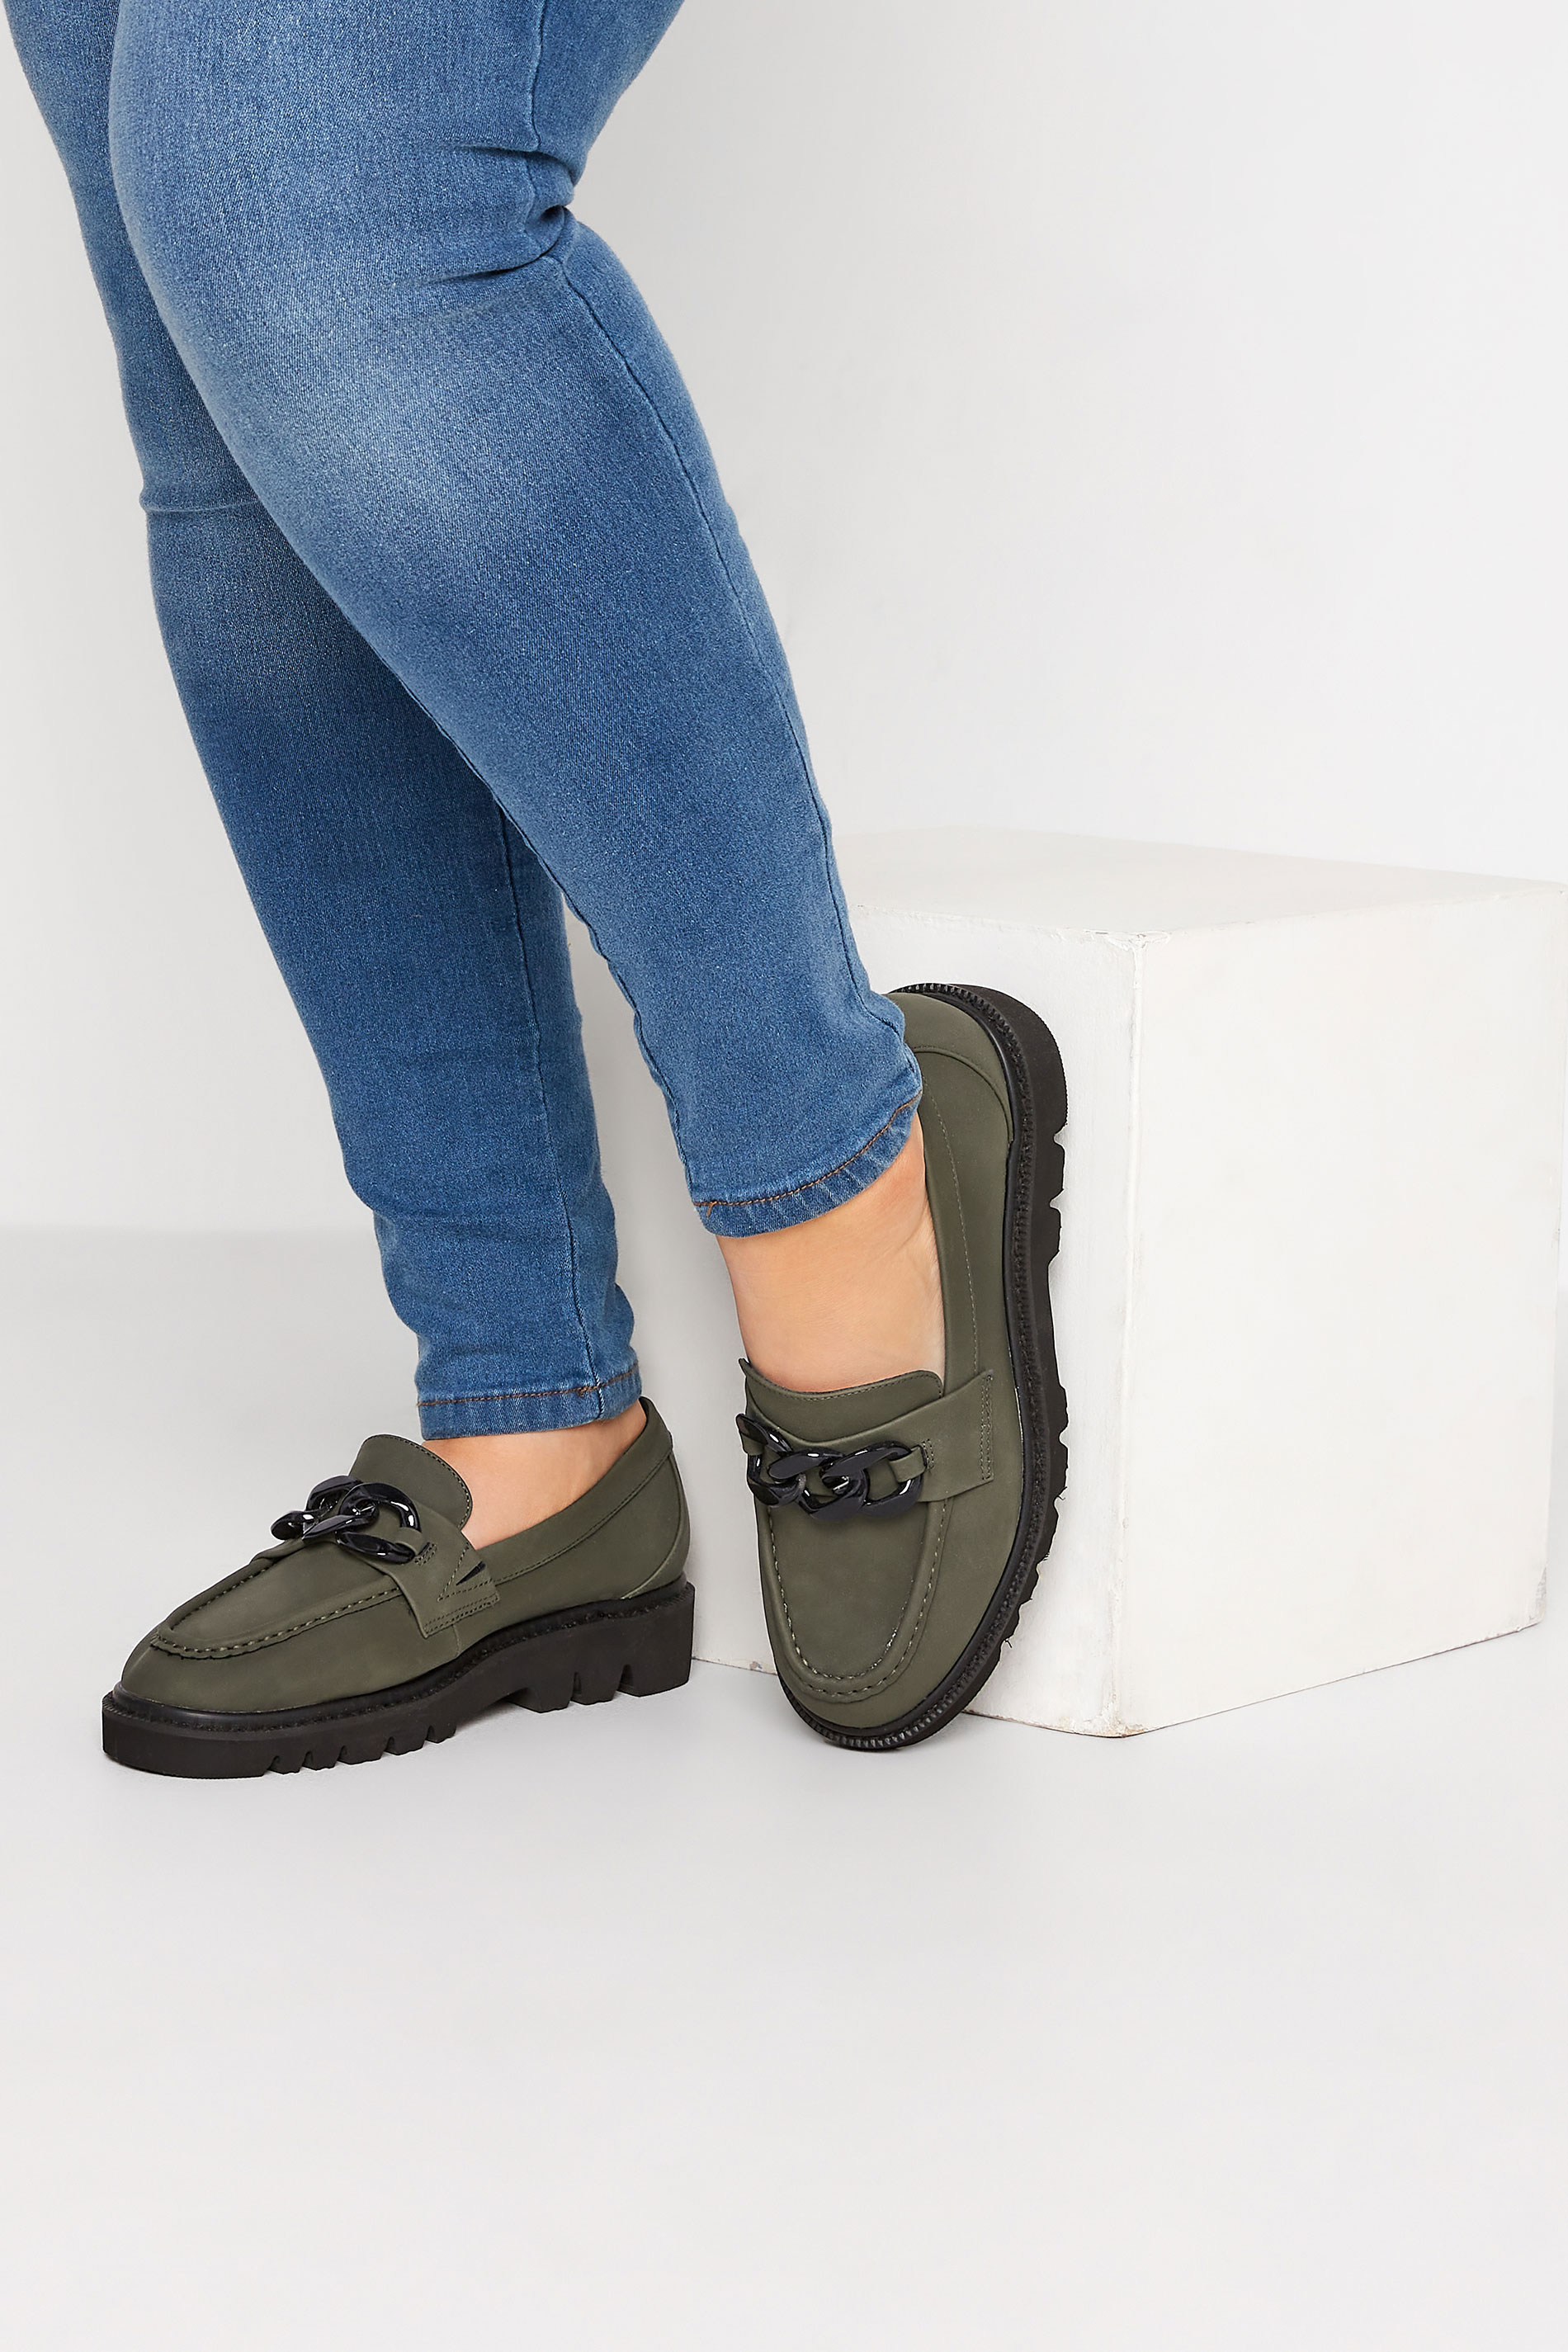 LIMITED COLLECTION Khaki Green Chunky Chain Loafers In Extra Wide EEE Fit_M.jpg